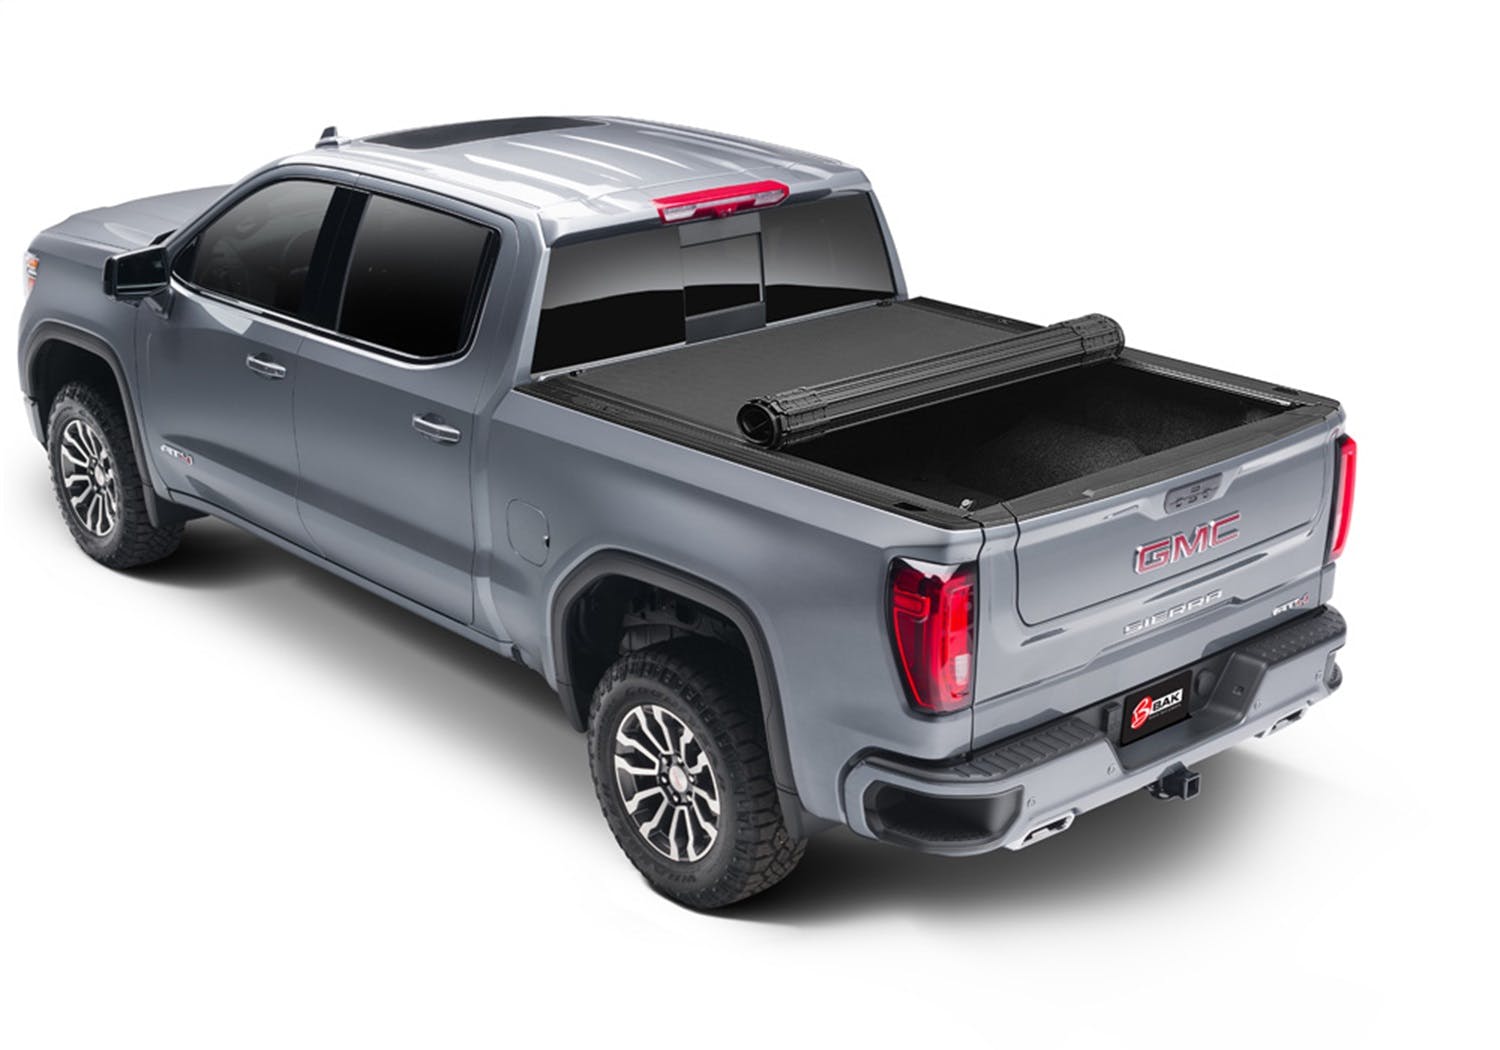 BAK Industries 80100 Revolver X4s Hard Rolling Truck Bed Cover